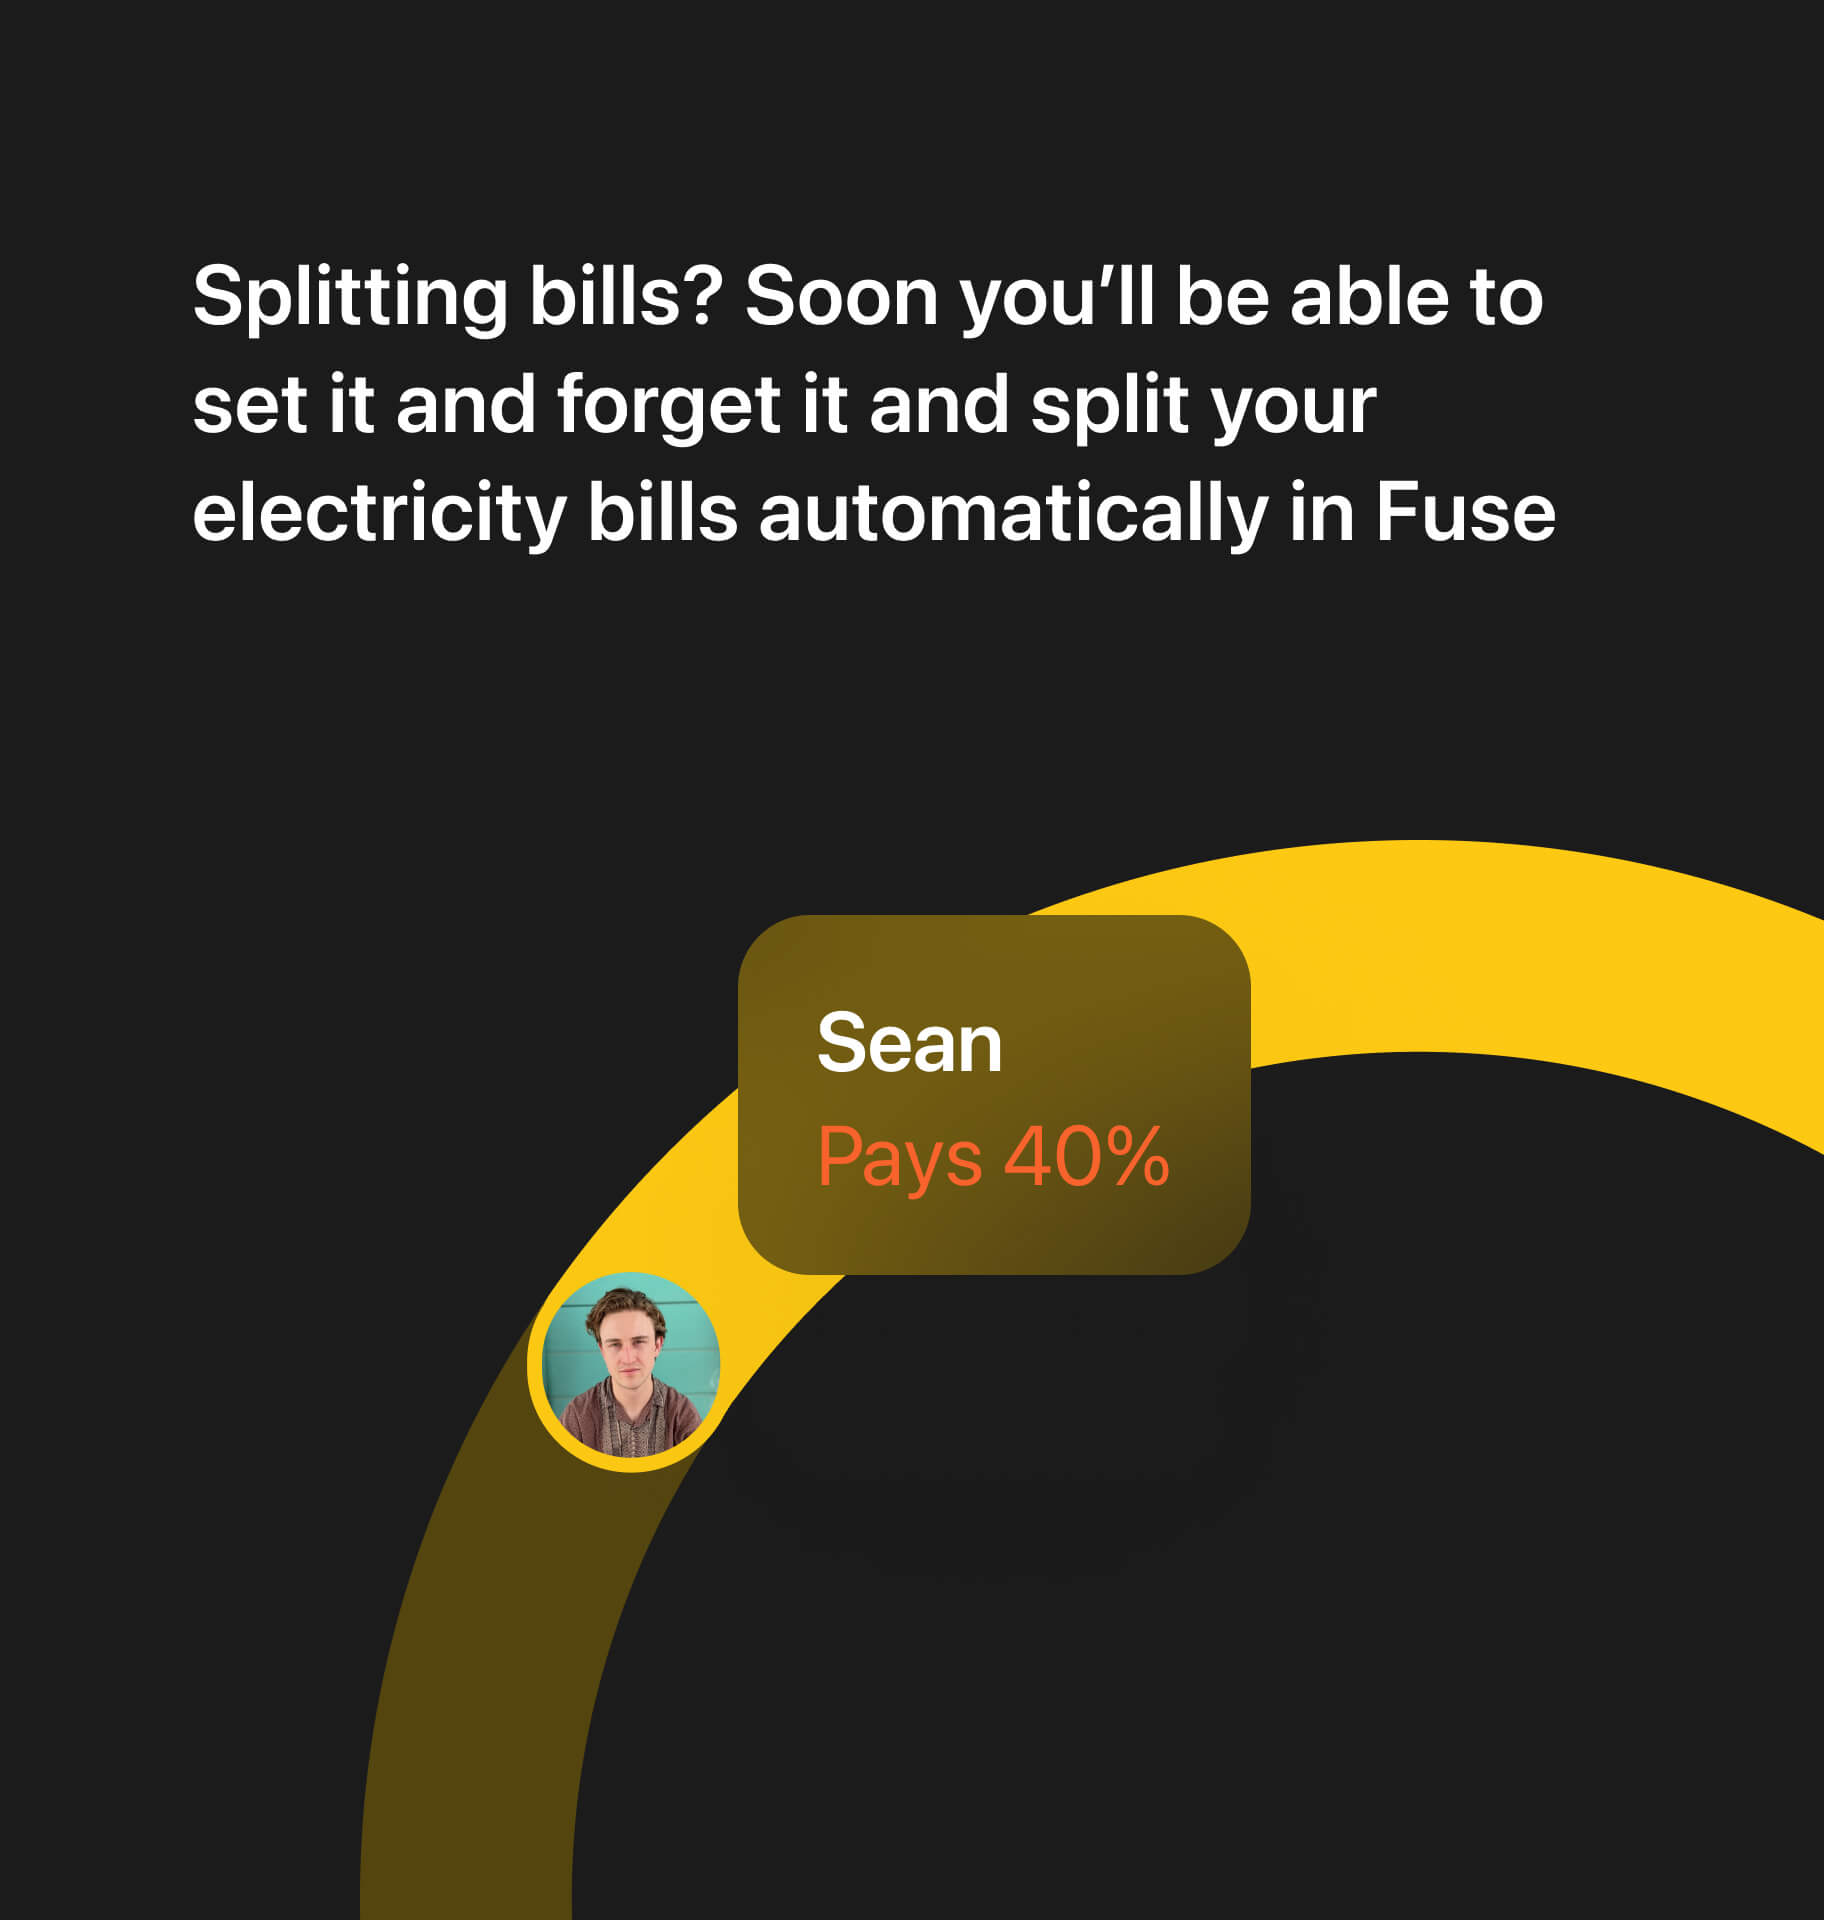 Splitting bills? Soon you’ll be able to set it and forget it and split your electricity bills automatically in Fuse